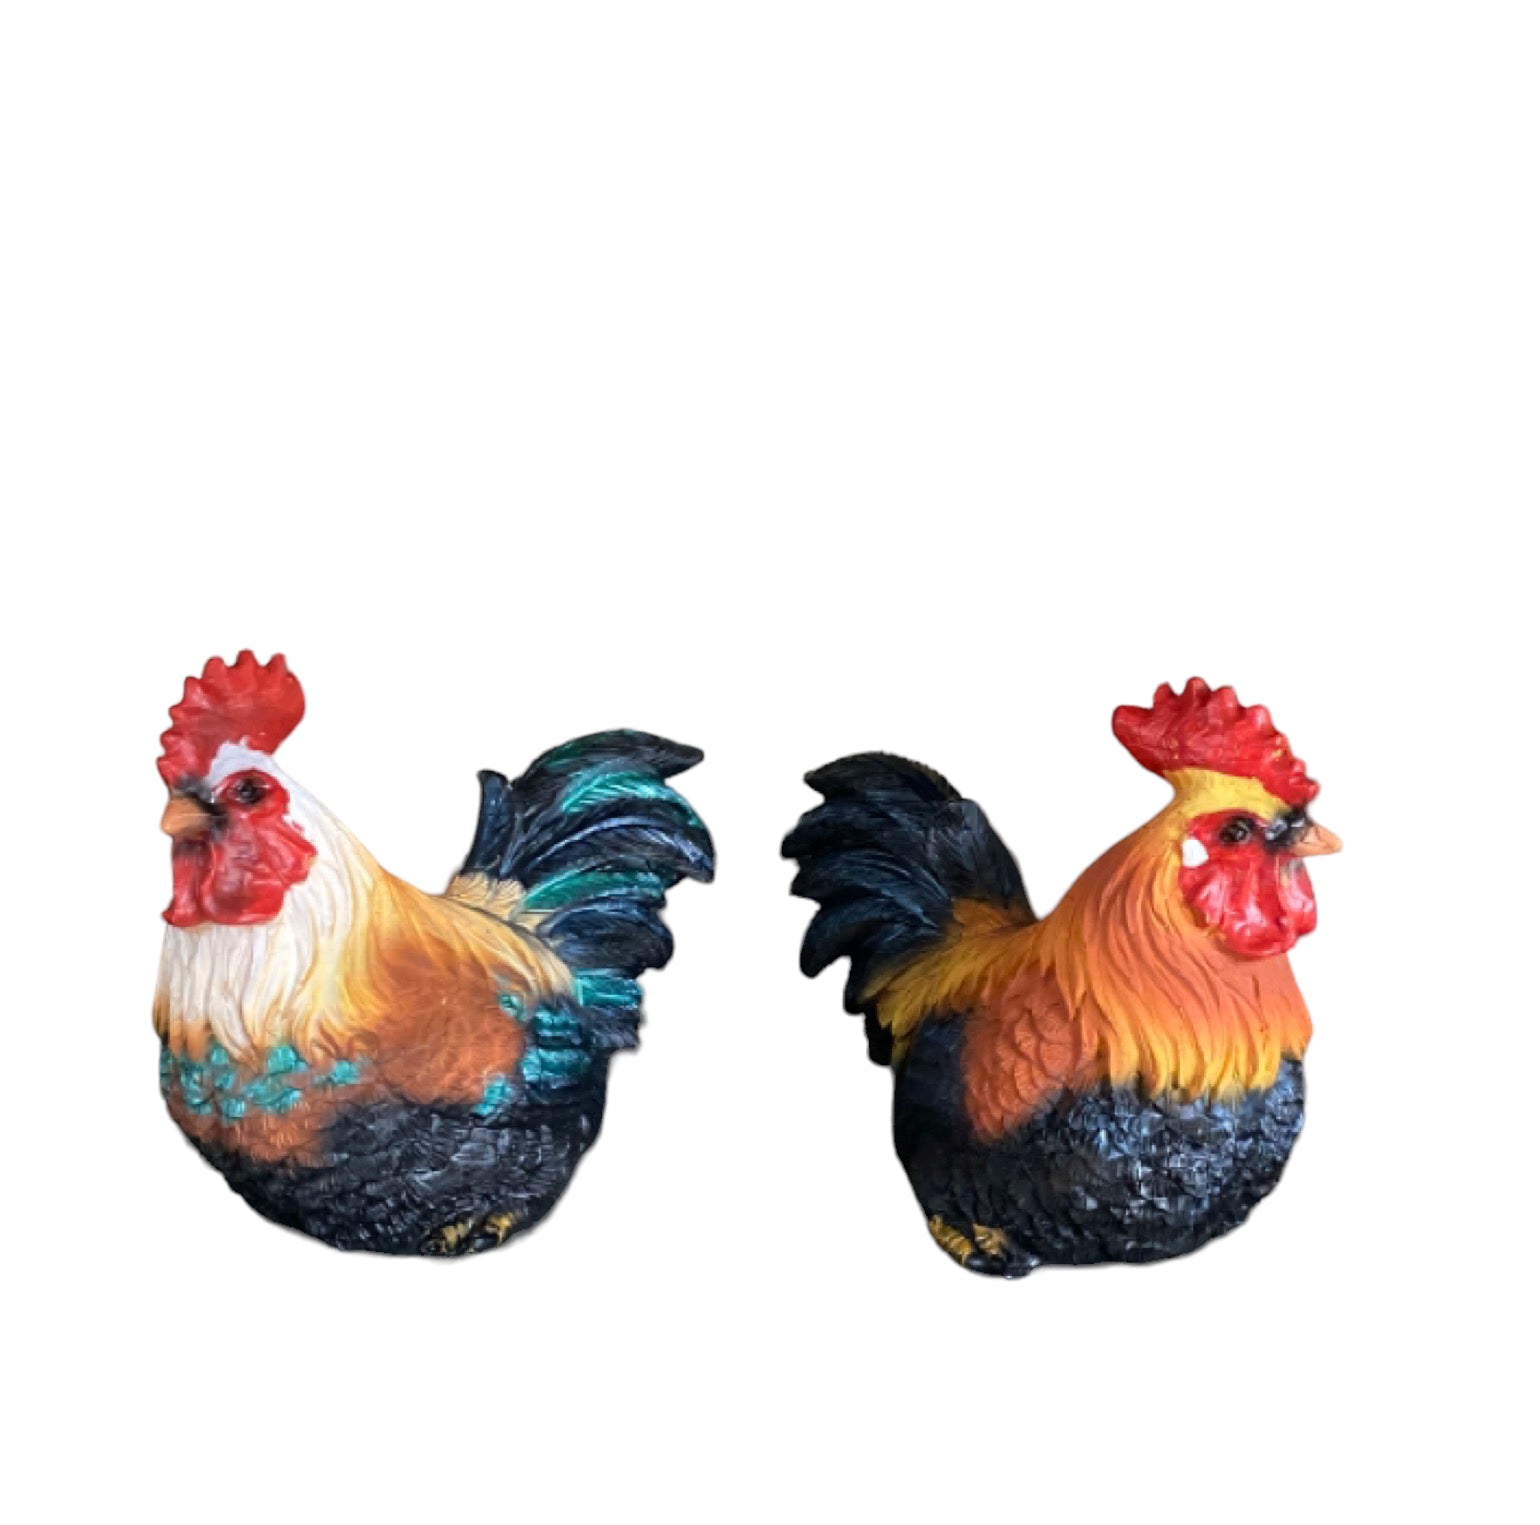 Rooster Country Set of 2 Ornament - The Renmy Store Homewares & Gifts 